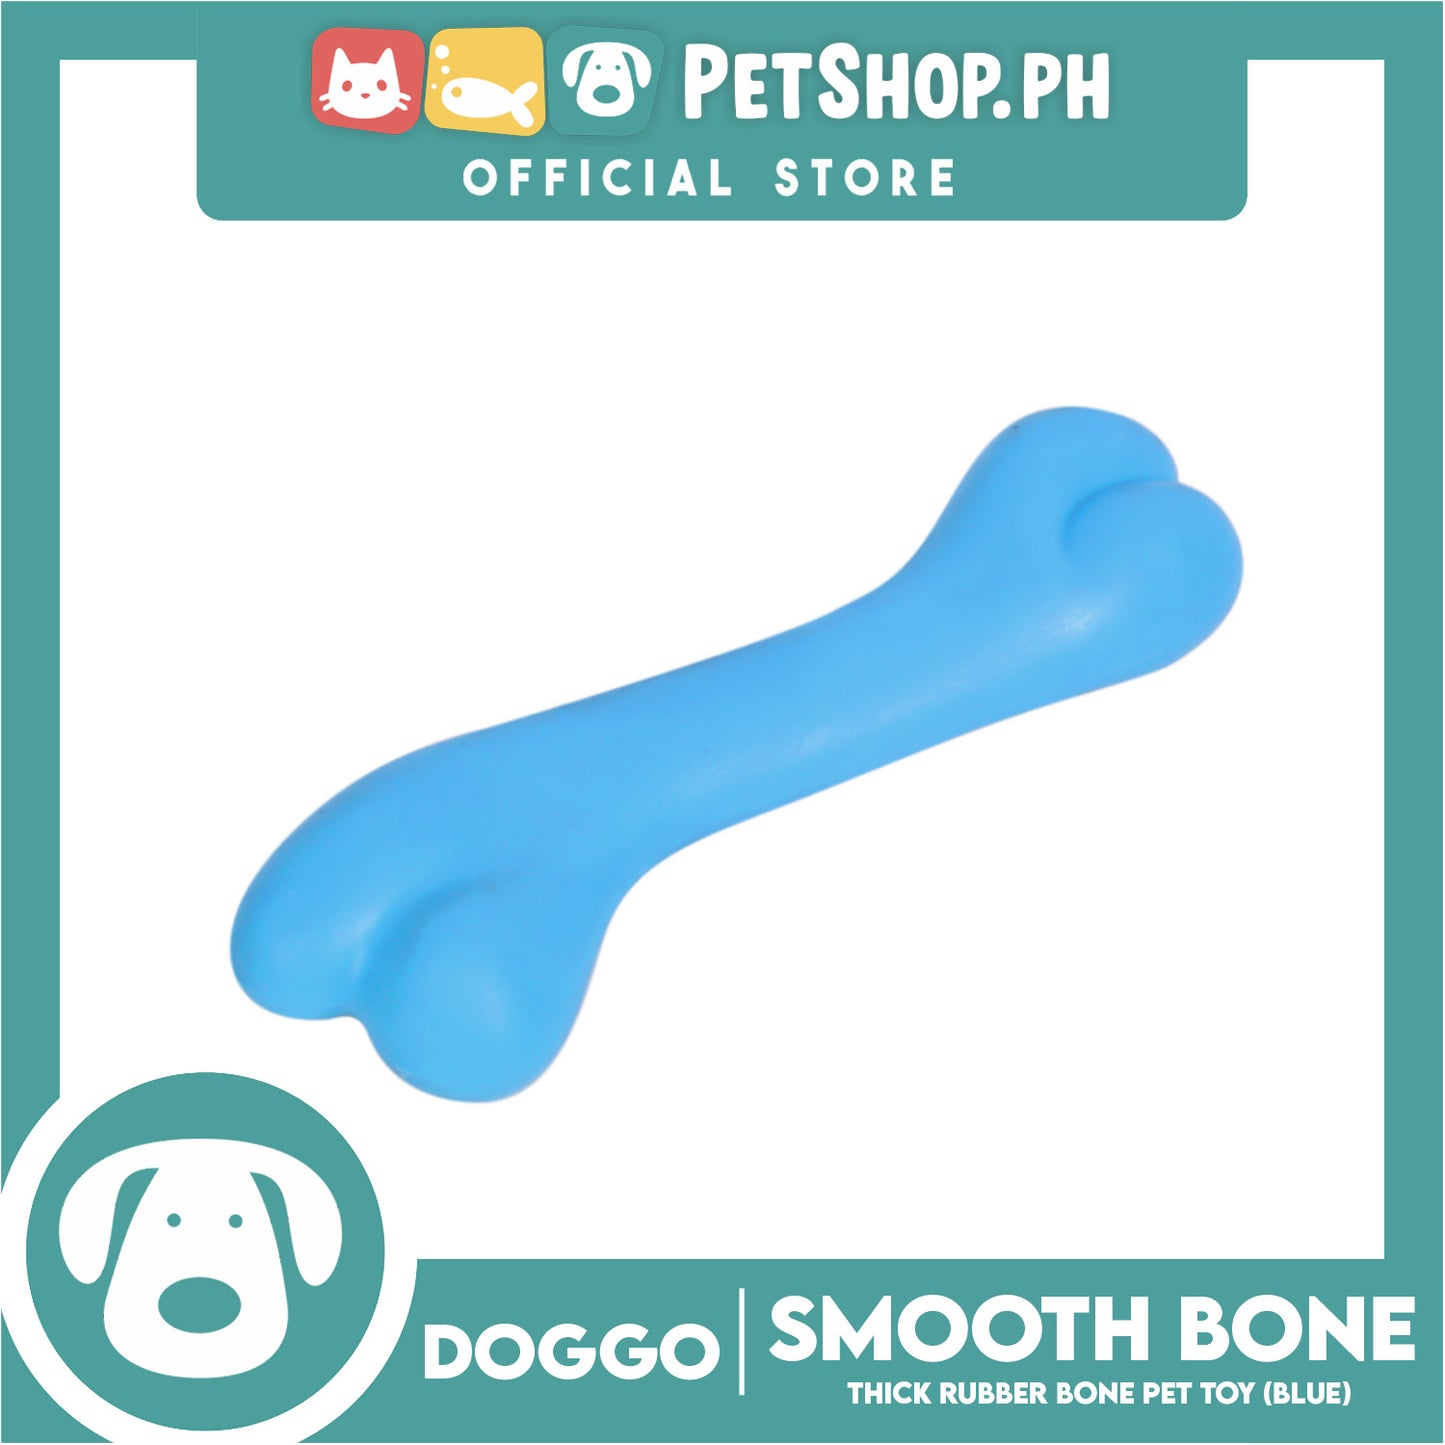 Doggo Smooth Bone (Blue) Small Size Thick Rubber Material Dog Toy